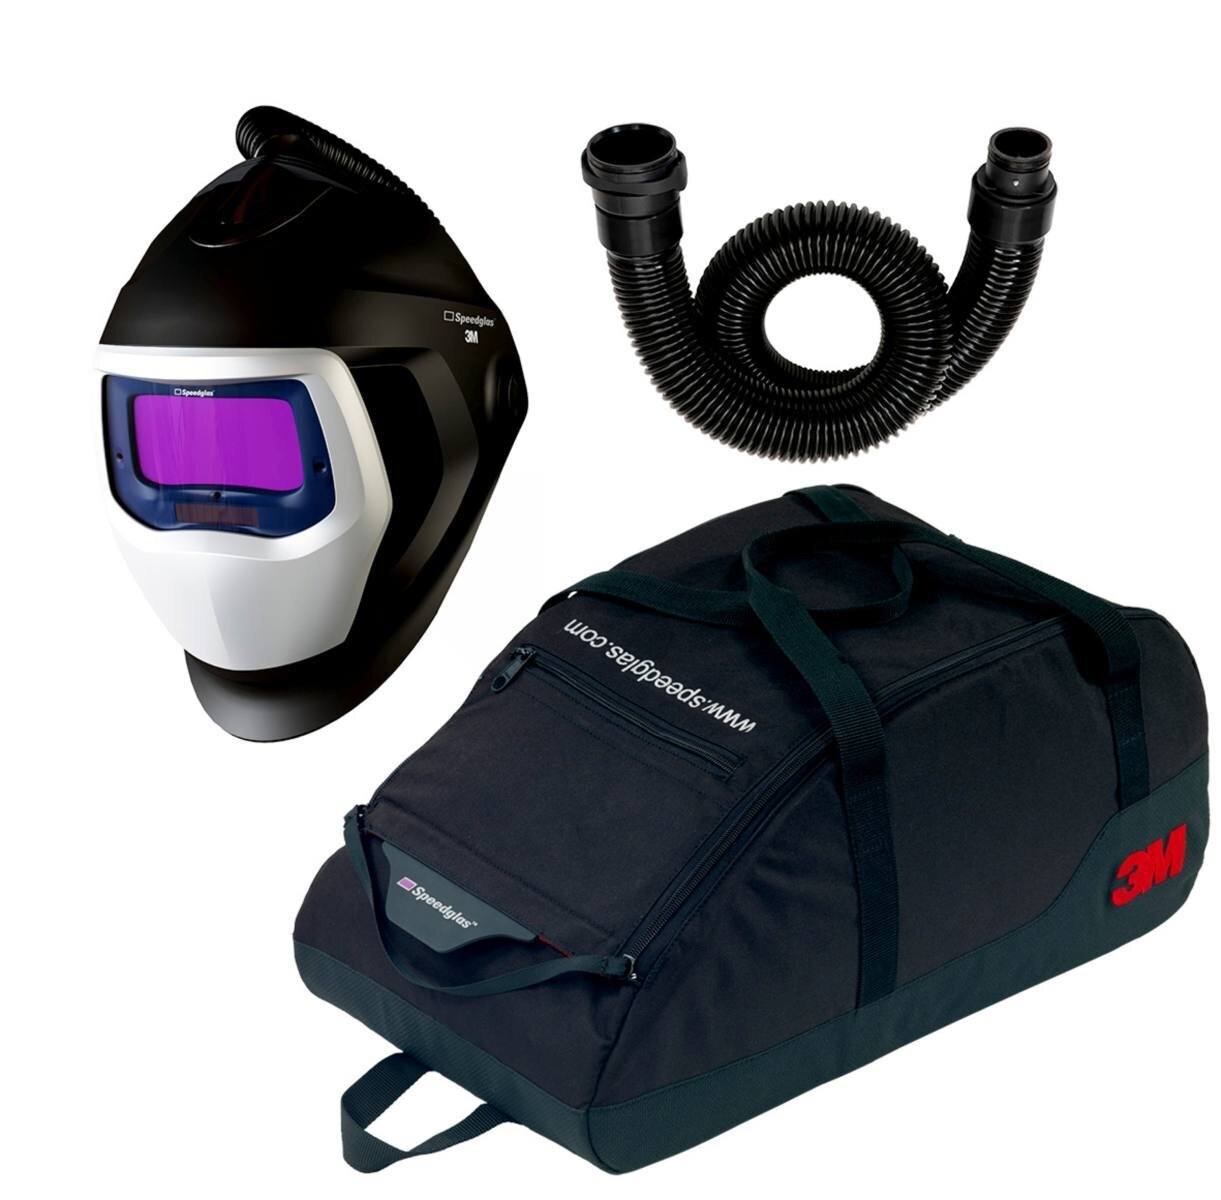 3M Speedglas 9100 Air welding mask with 9100X ADF, incl. air hose, incl. storage bag 79 01 01 - TH2 upgrade kit #569015